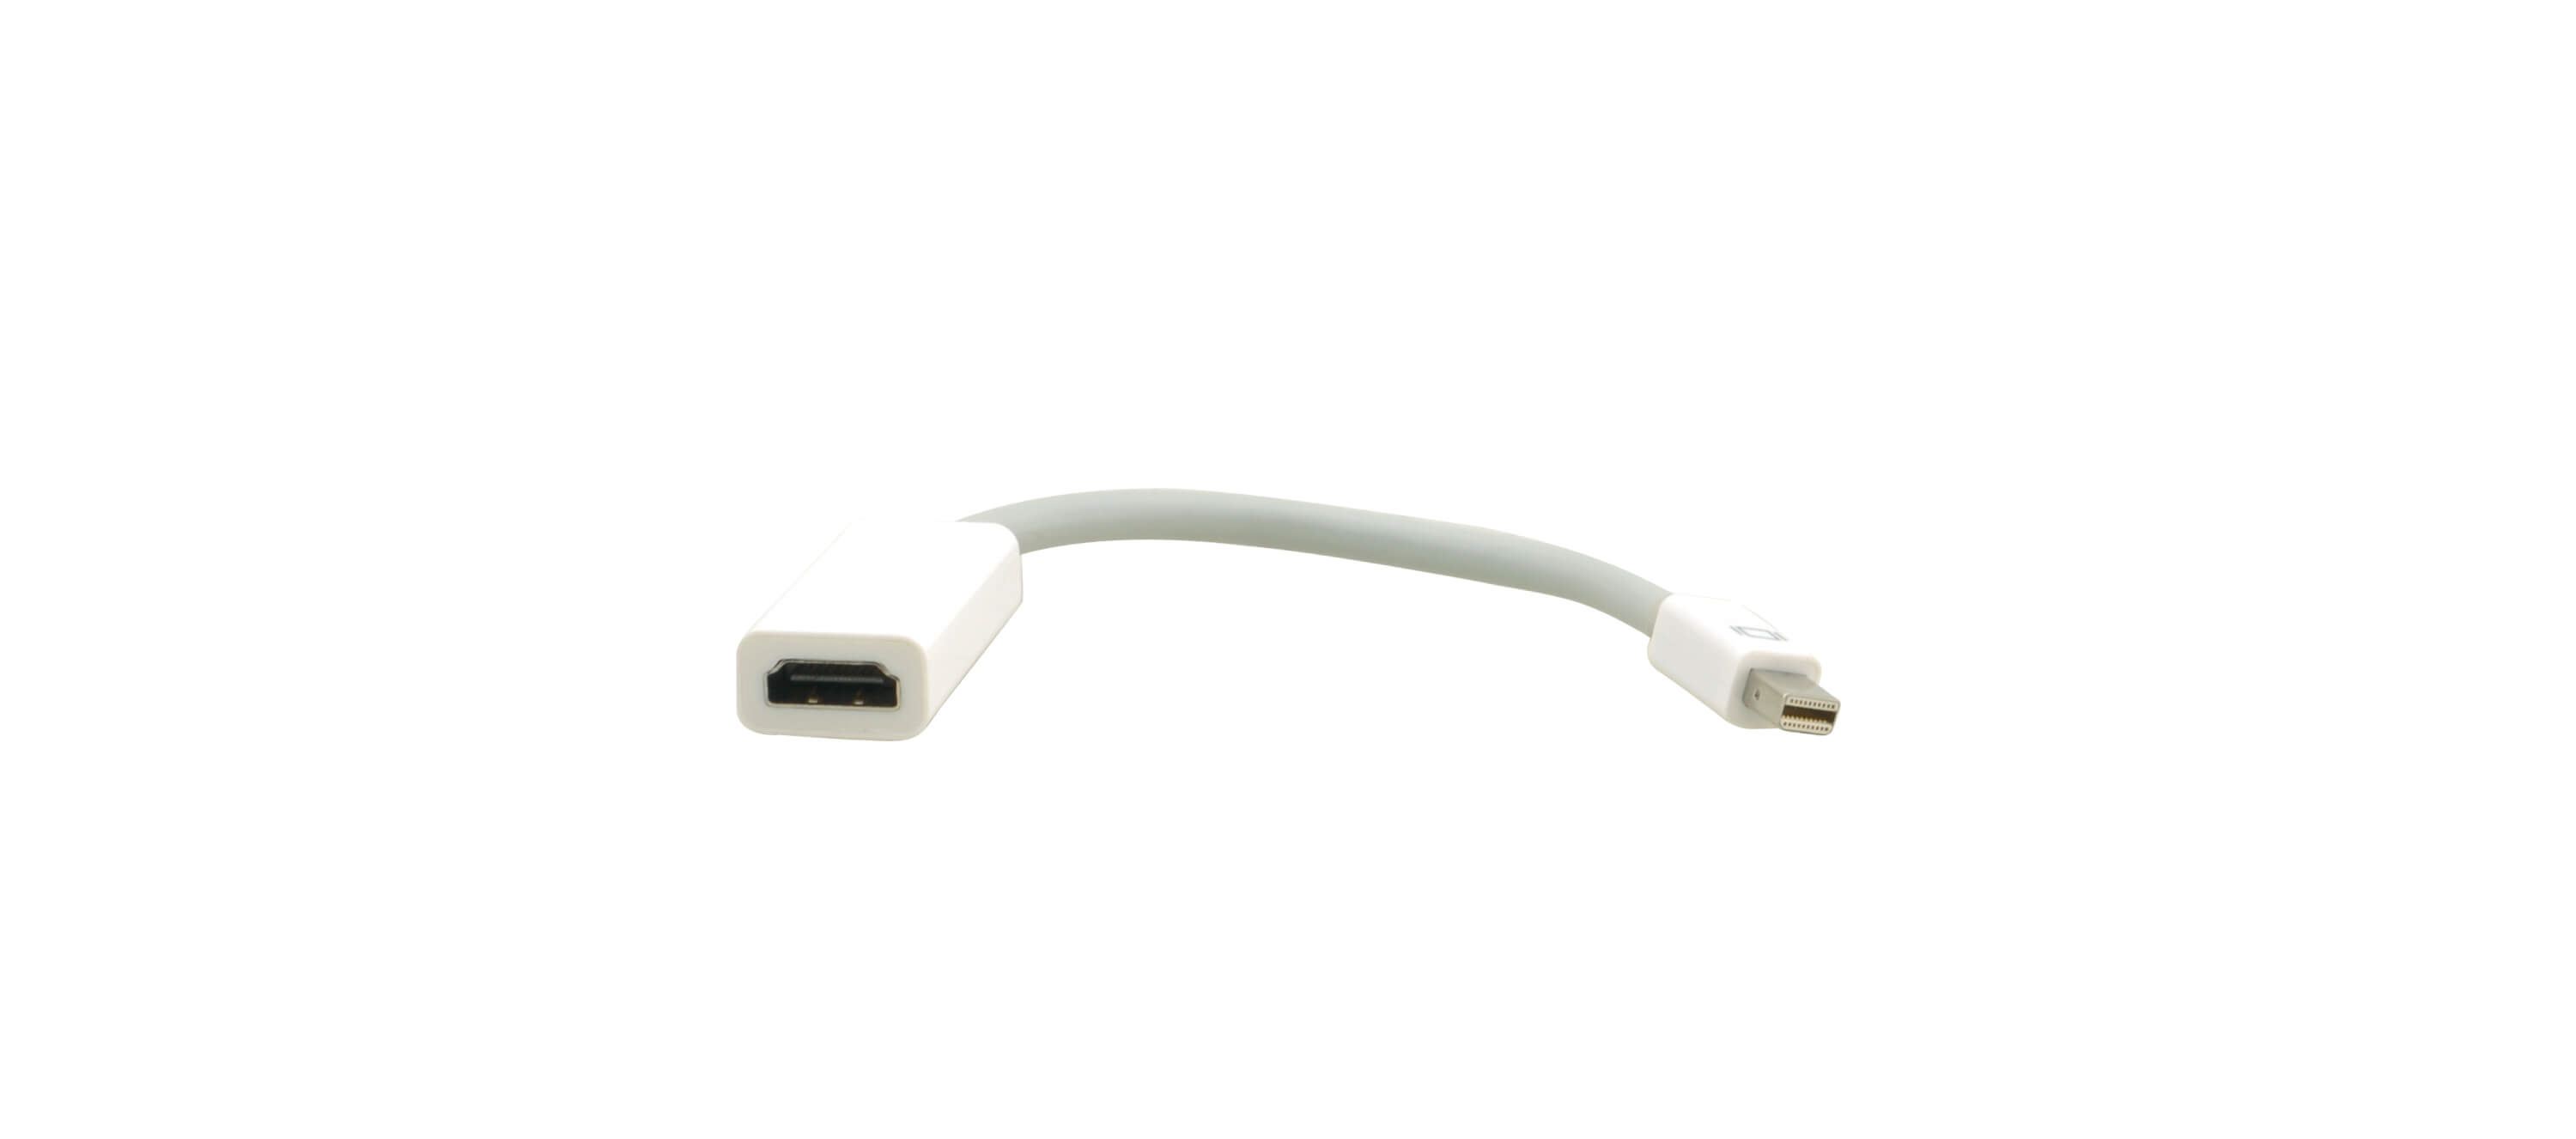 ADC-MDP/HF4 Mini DisplayPort to HDMI Active 4K30 Adapter Cable